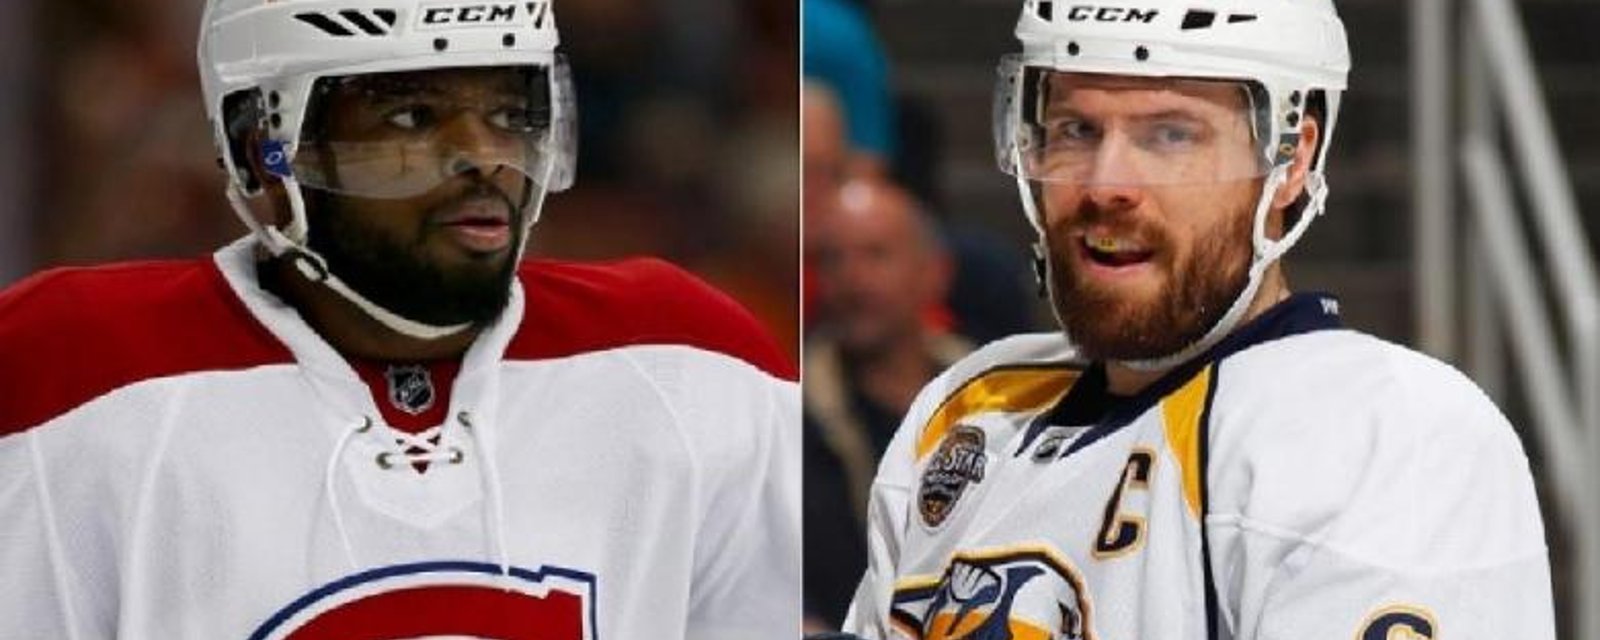 Former teammate of both Subban and Weber believes Montreal won the trade.